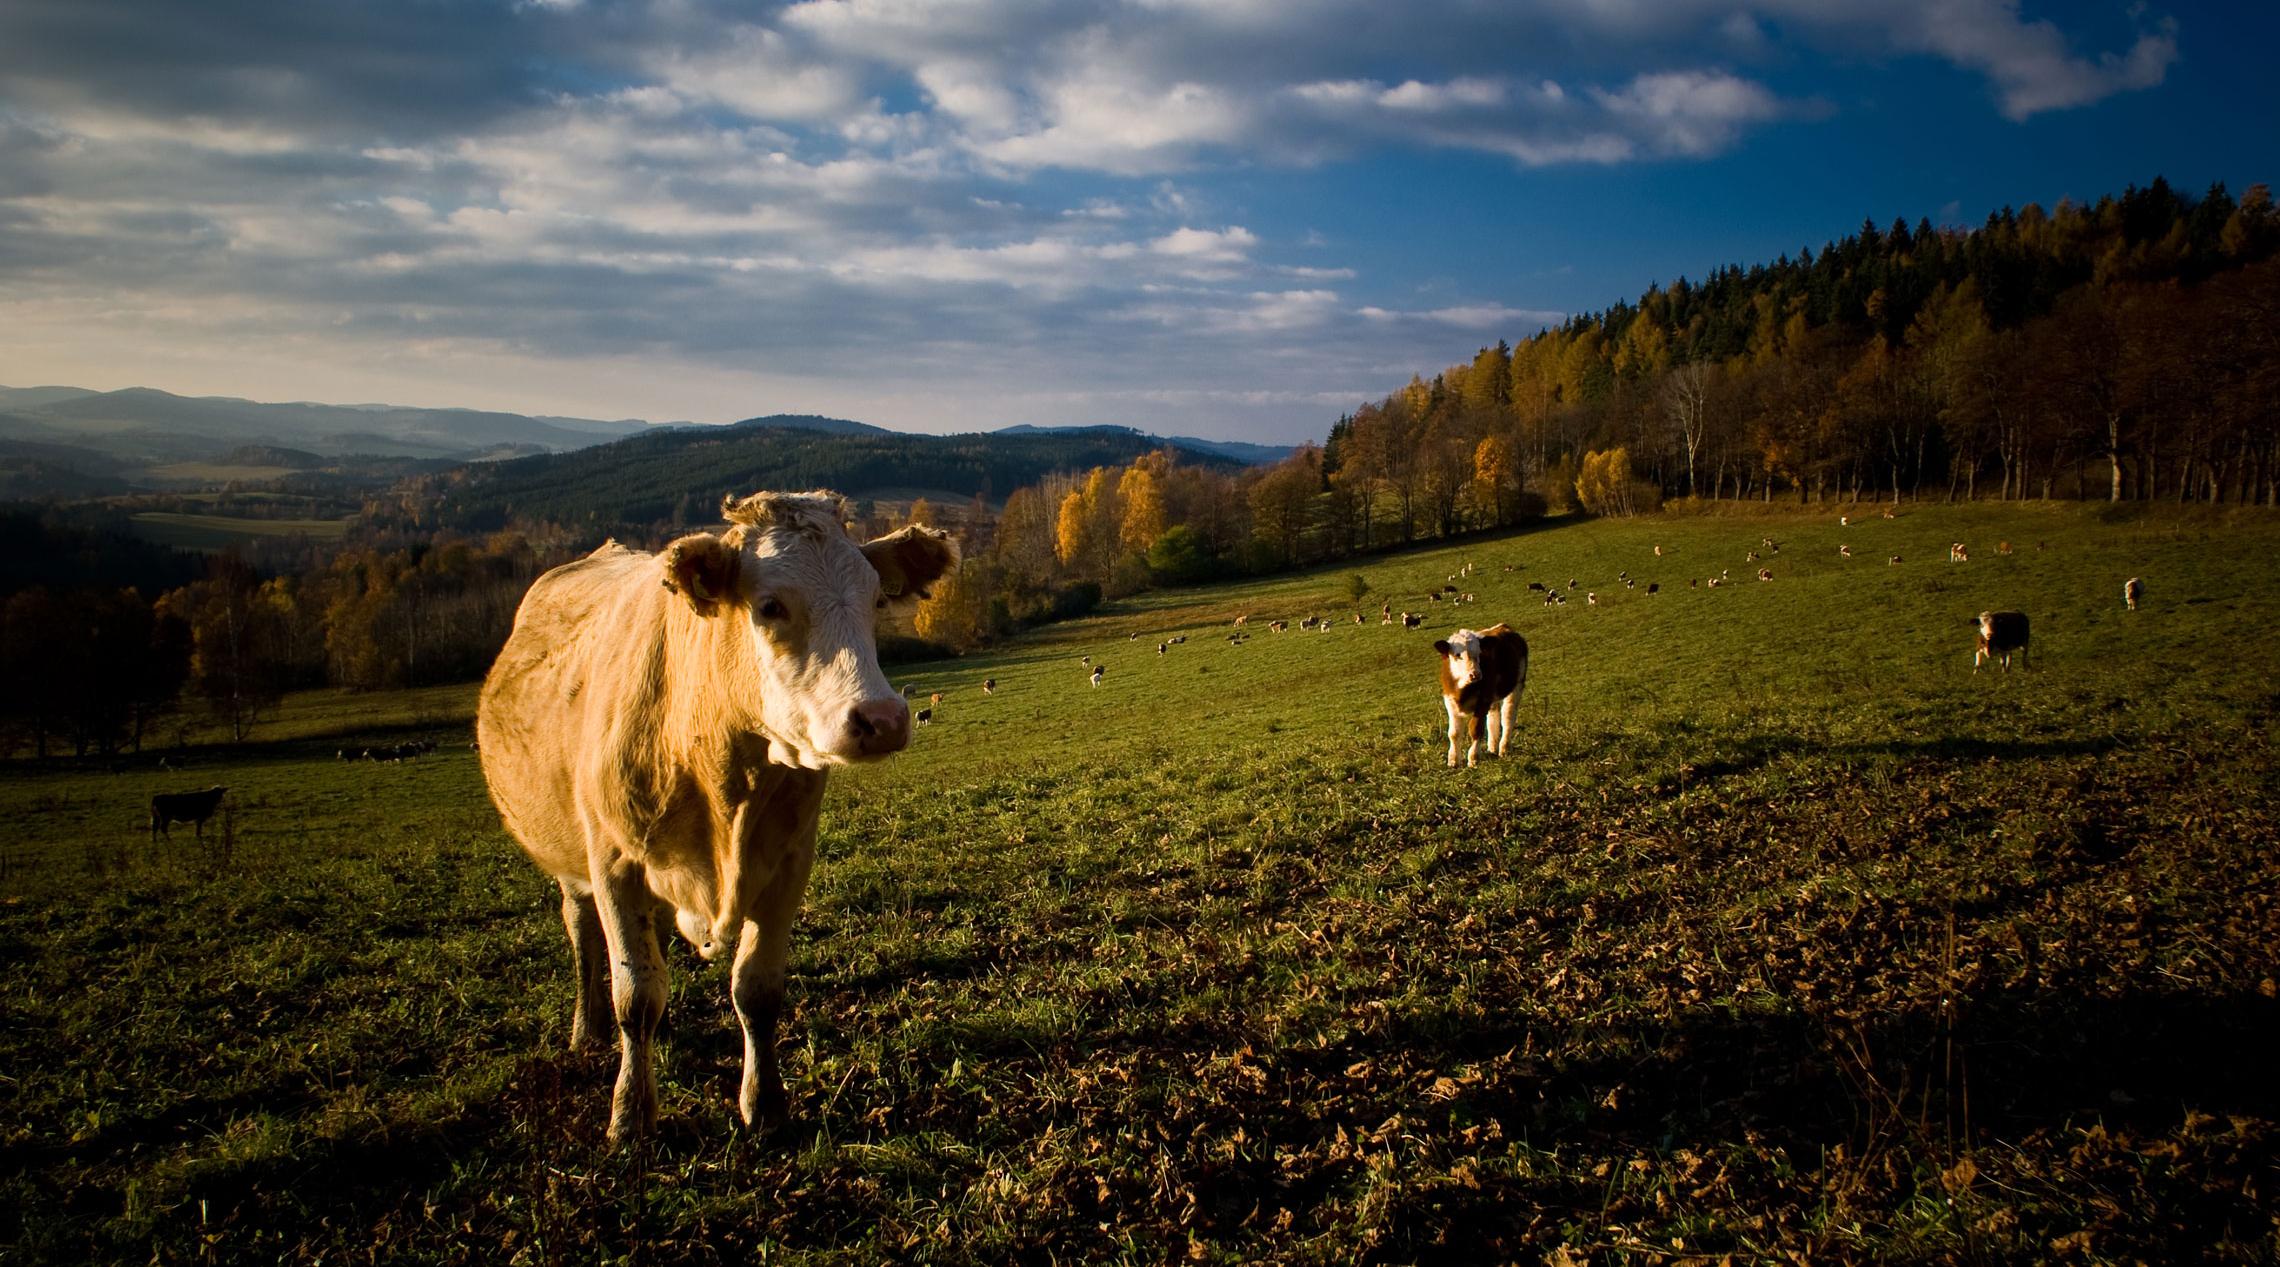 Cows in a hilly pasture in the evening light